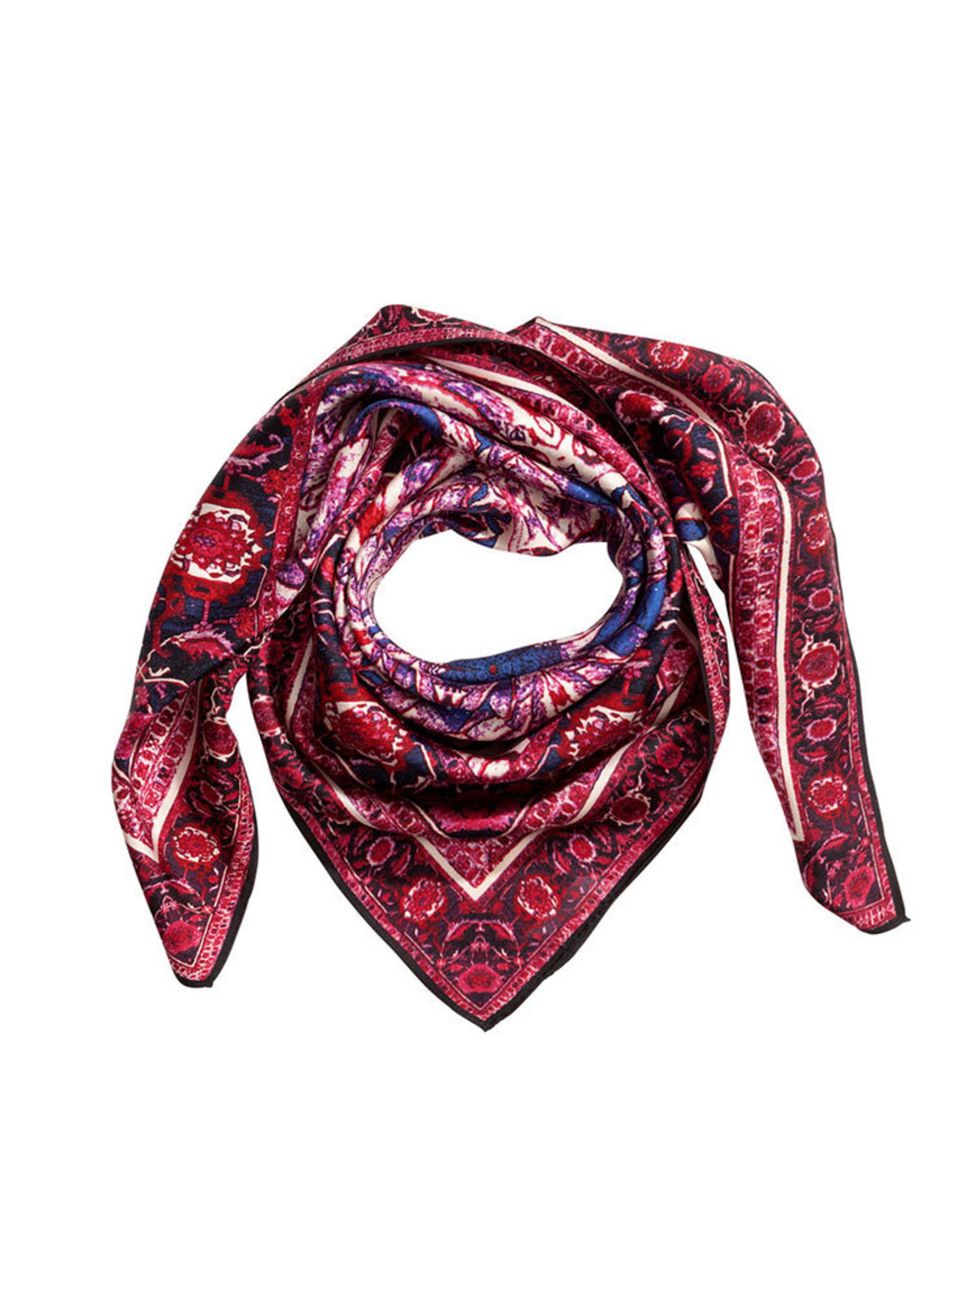 <p><a href="http://www.hm.com/gb/product/45449?article=45449-A&cm_mmc=pla-_-gb-_-ladies_accessories_hats_scarves-_-45449&gclid=CJr5_oiHosMCFVDHtAoddRMAMQ" target="_blank">H&M</a> patterned scarf, £29.99</p>